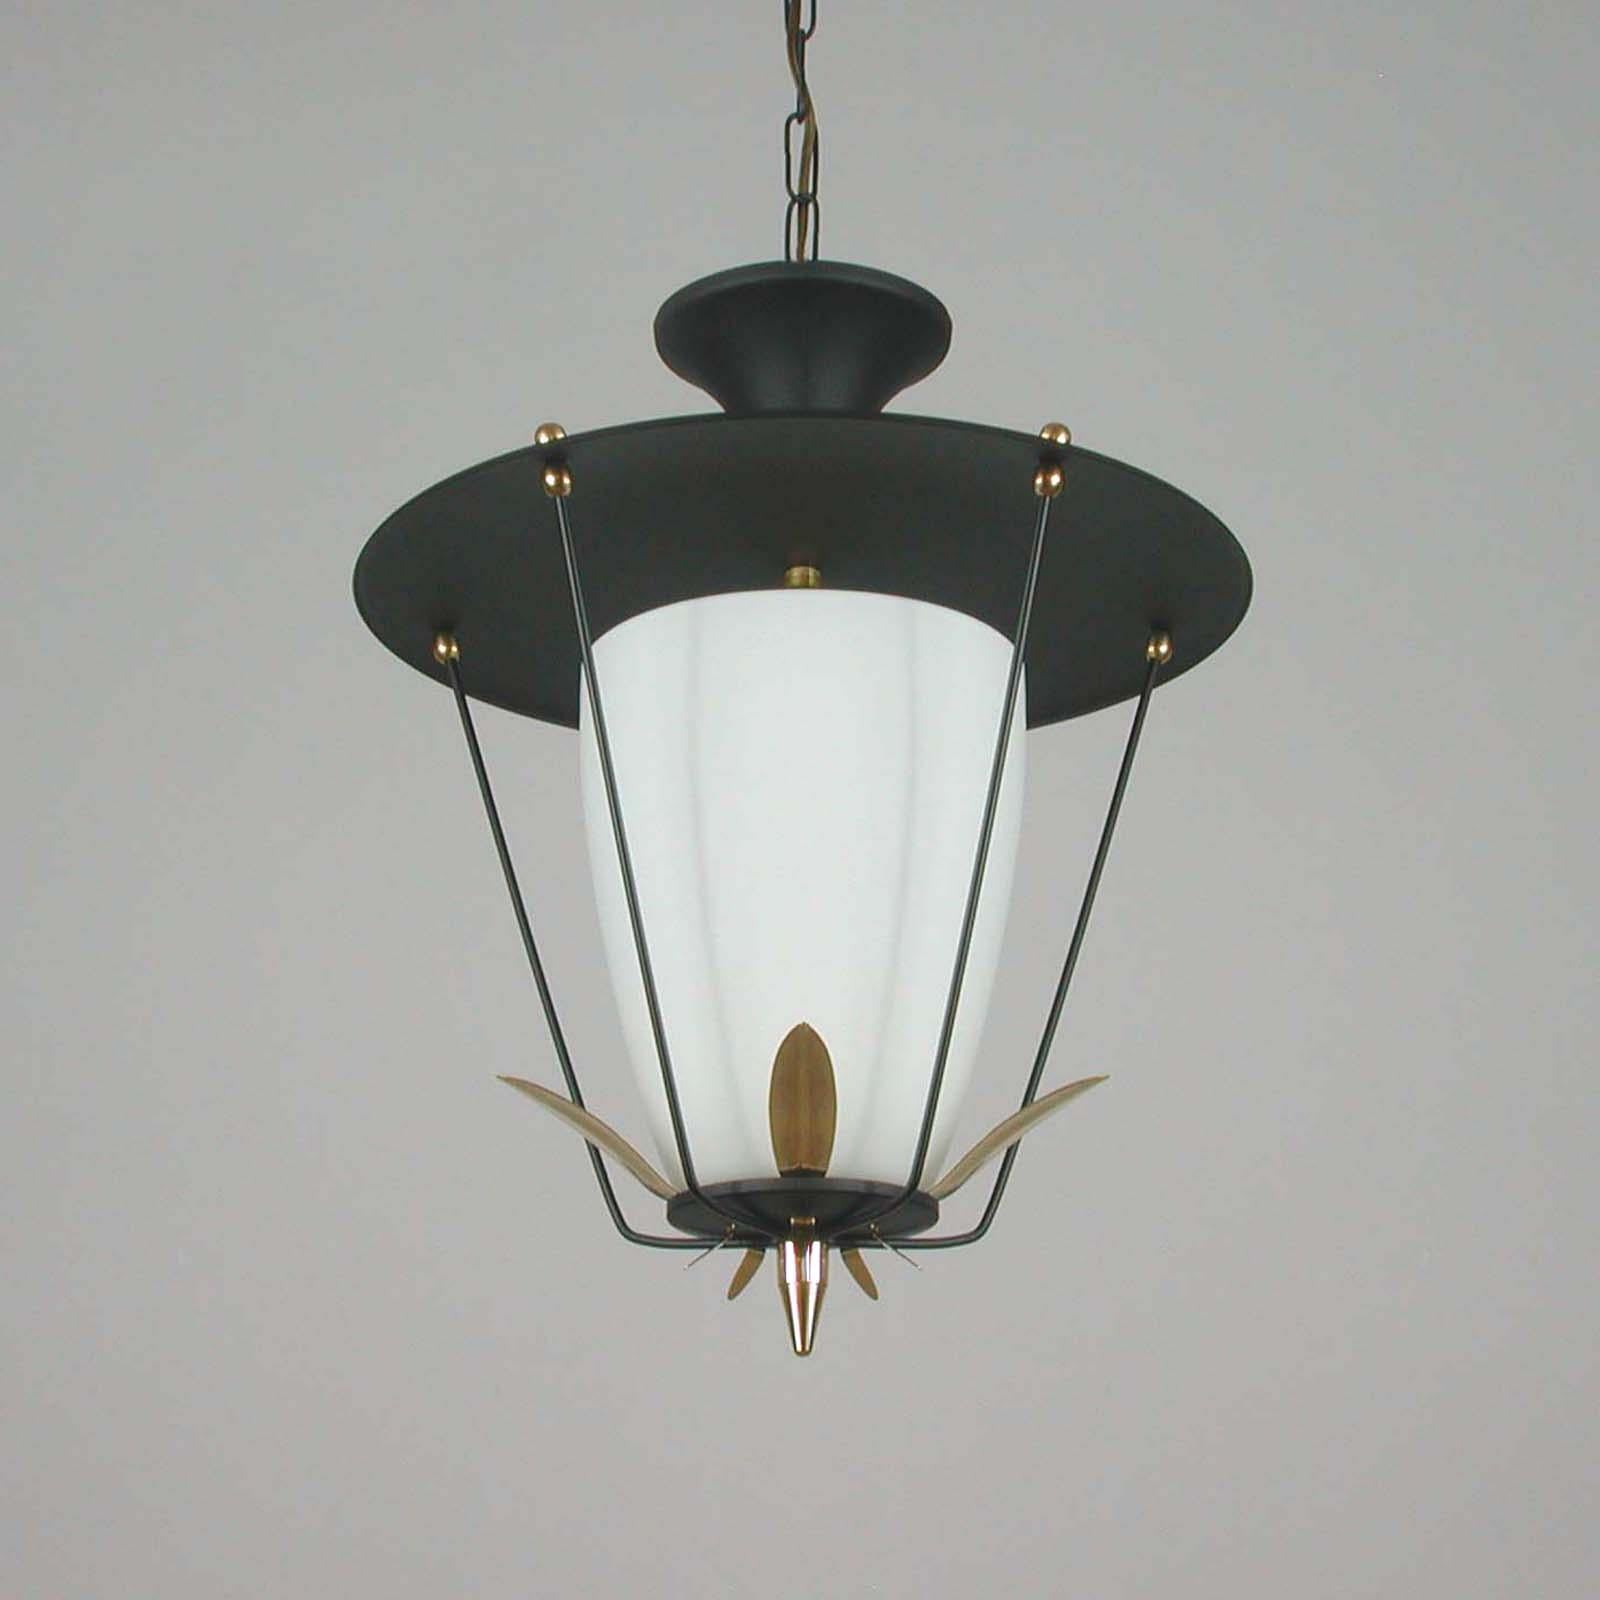 This vintage Maison Arlus / Lunel style lantern / ceiling light was made in France in the 1950s. It is made of black lacquered metal with a white frosted glass diffuser and has got brass details. 

The lantern requires a French B22 bayonet bulb.